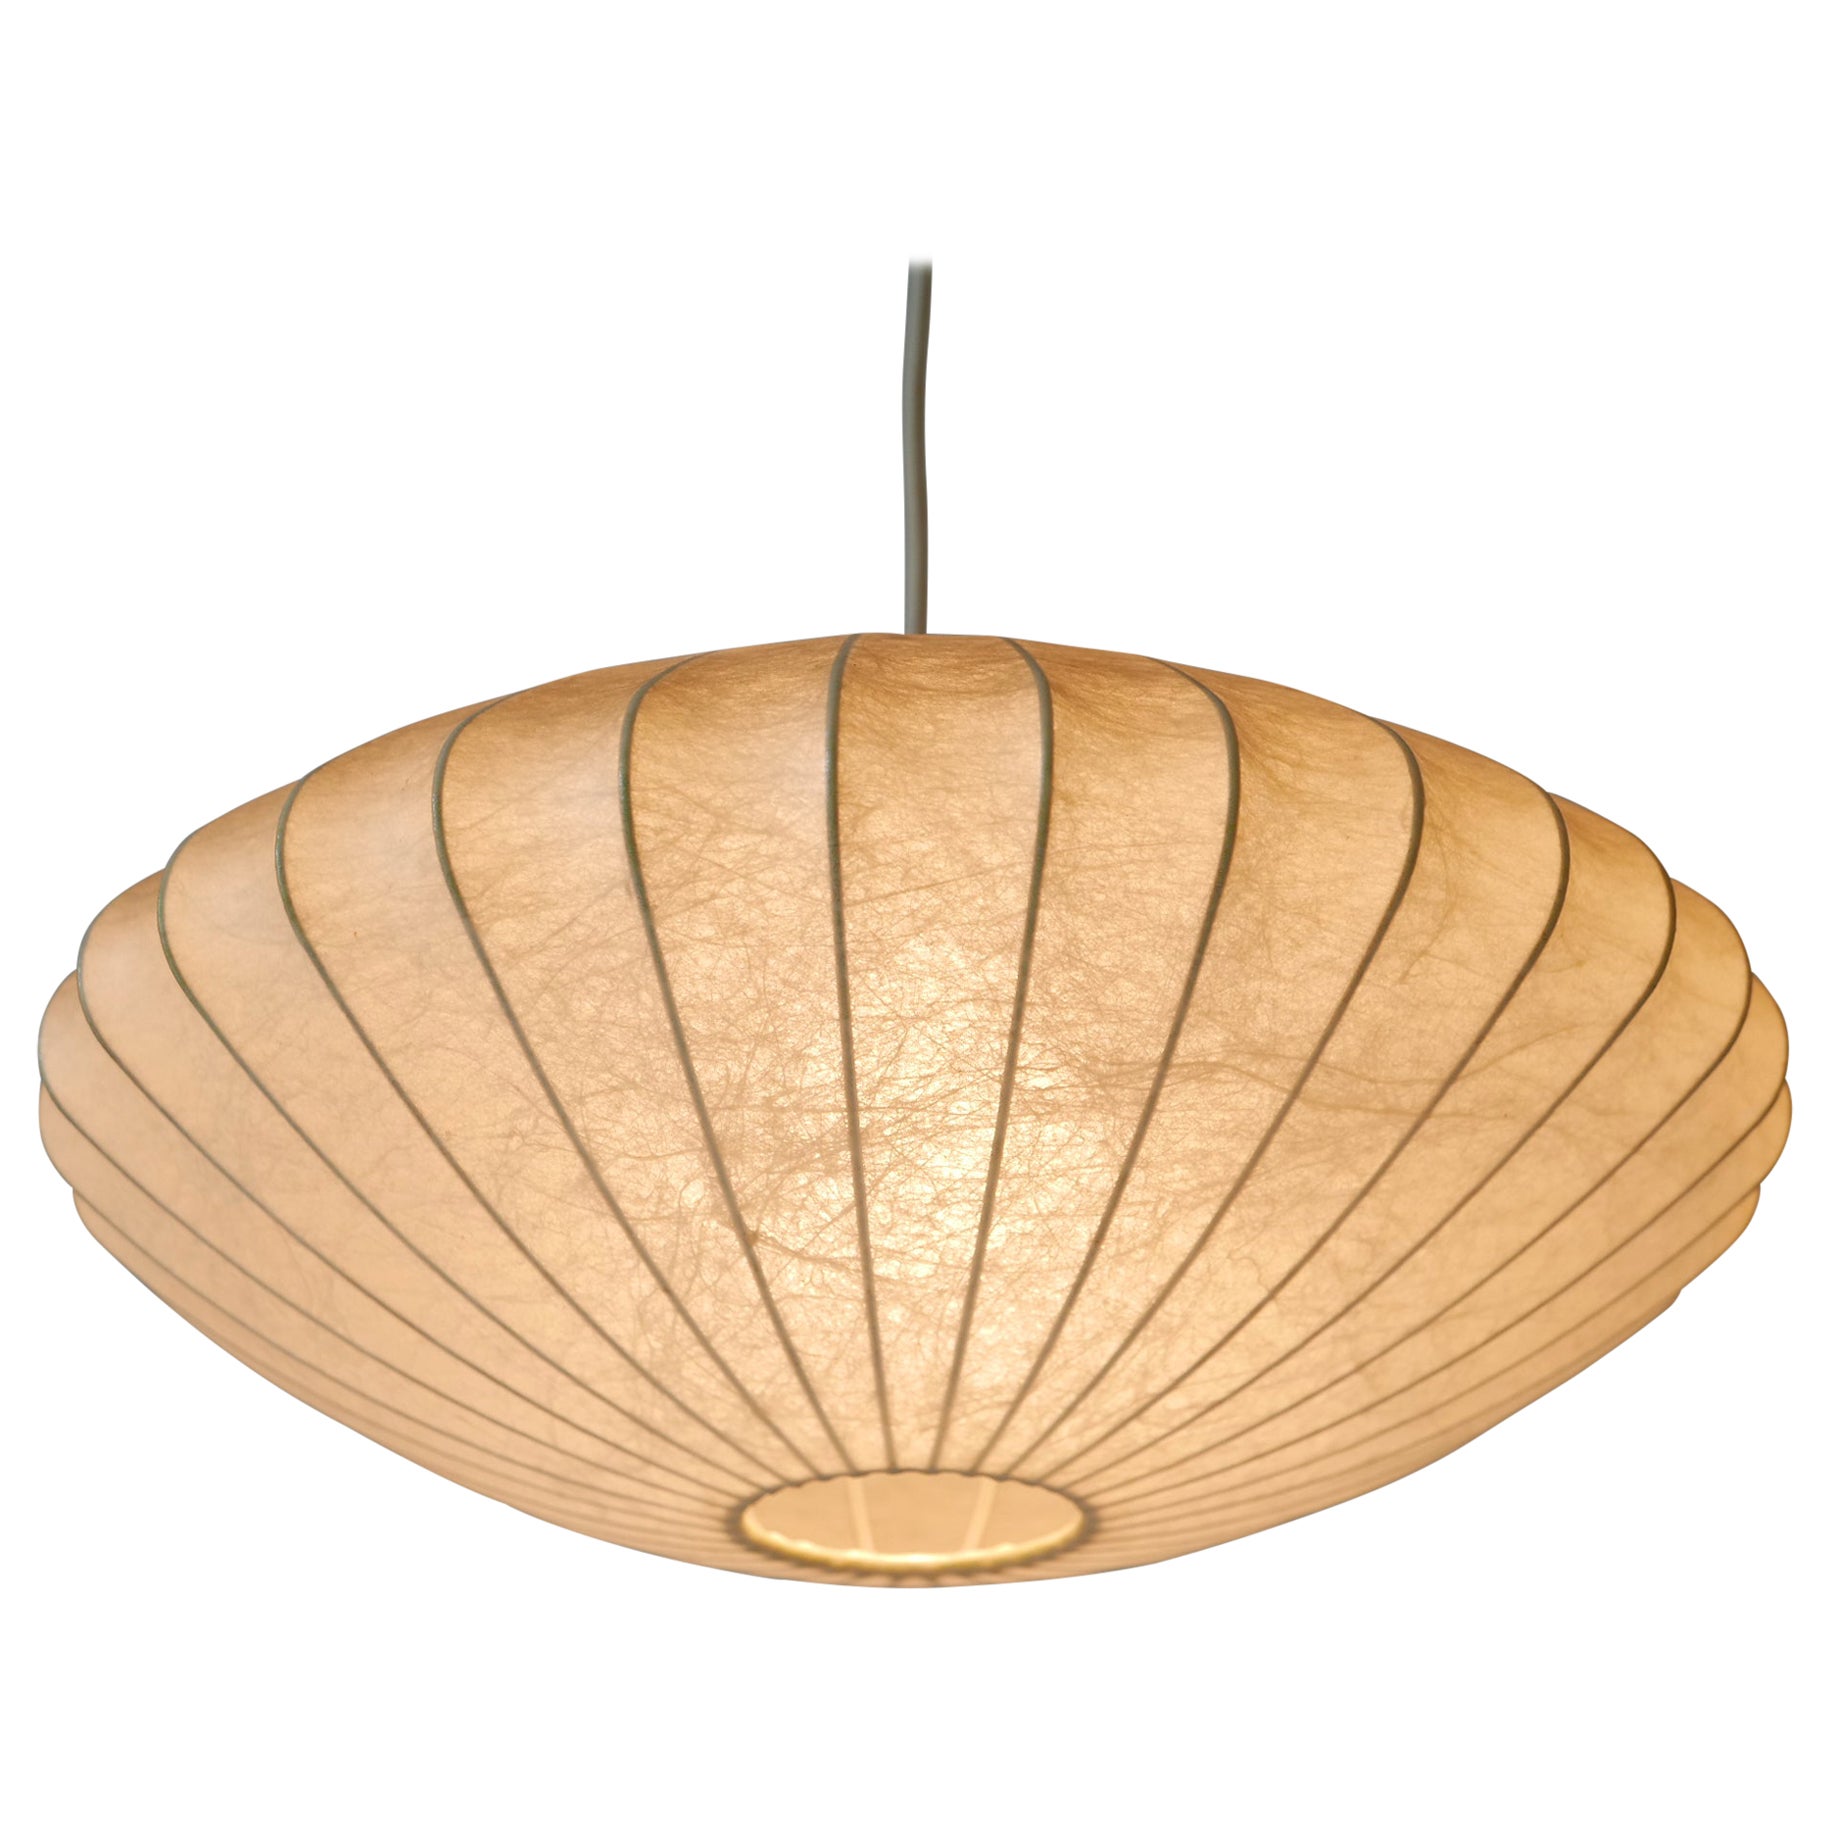 Rare Mid-Century Modern Cocoon Pendant Lamp or Hanging Light by Goldkant 1960s For Sale